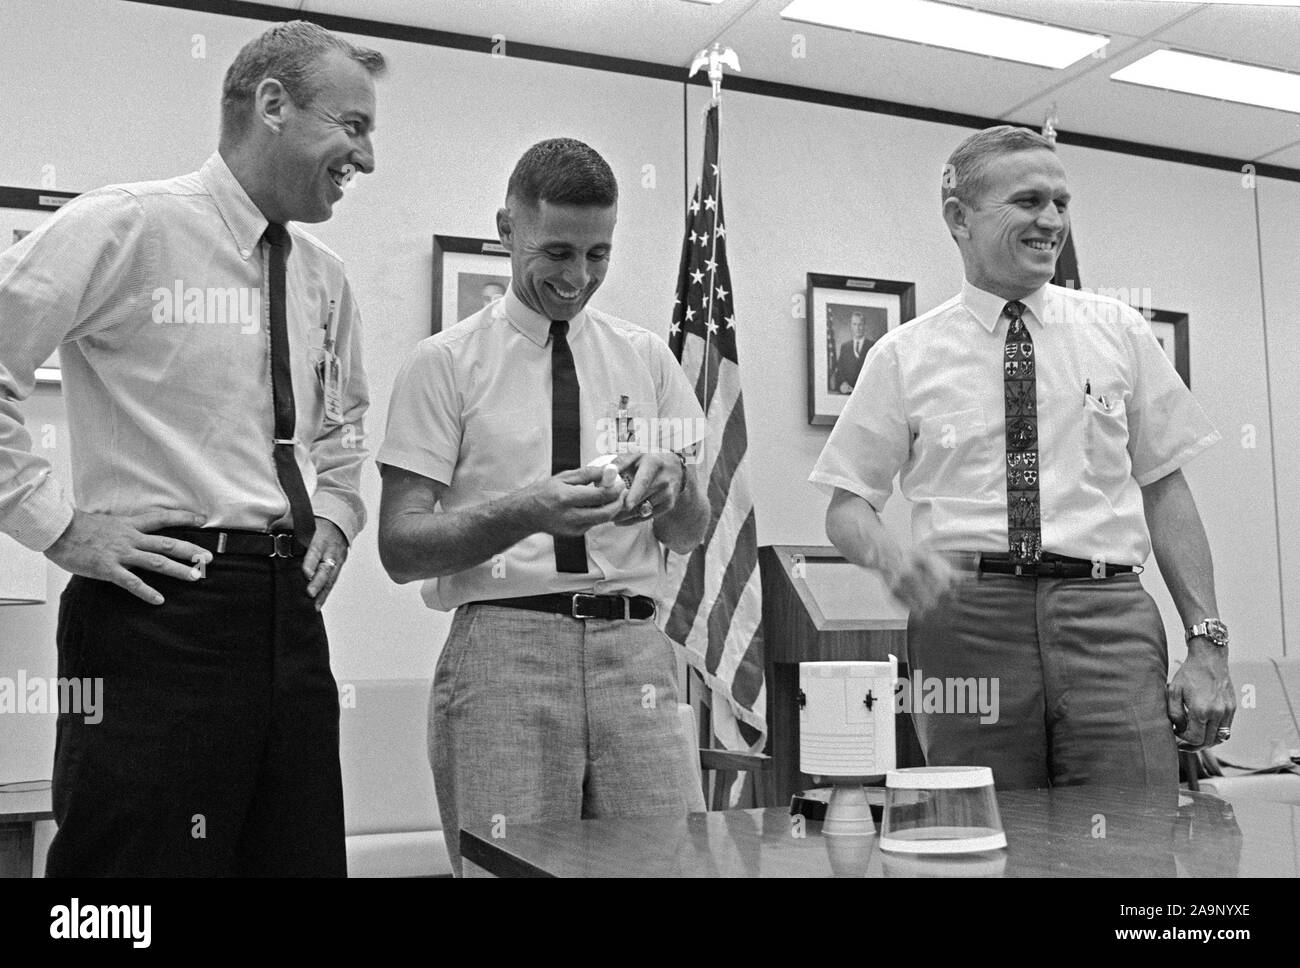 (18 Oct. 1968) --- The prime crew of the Apollo 8 mission is photographed in Building 4, at the Manned Spacecraft Center (MSC), where they are participating in classroom work in burn test review and procedures review. Left to right, are astronauts James A. Lovell Jr., William A. Anders, and Frank Borman. Stock Photo